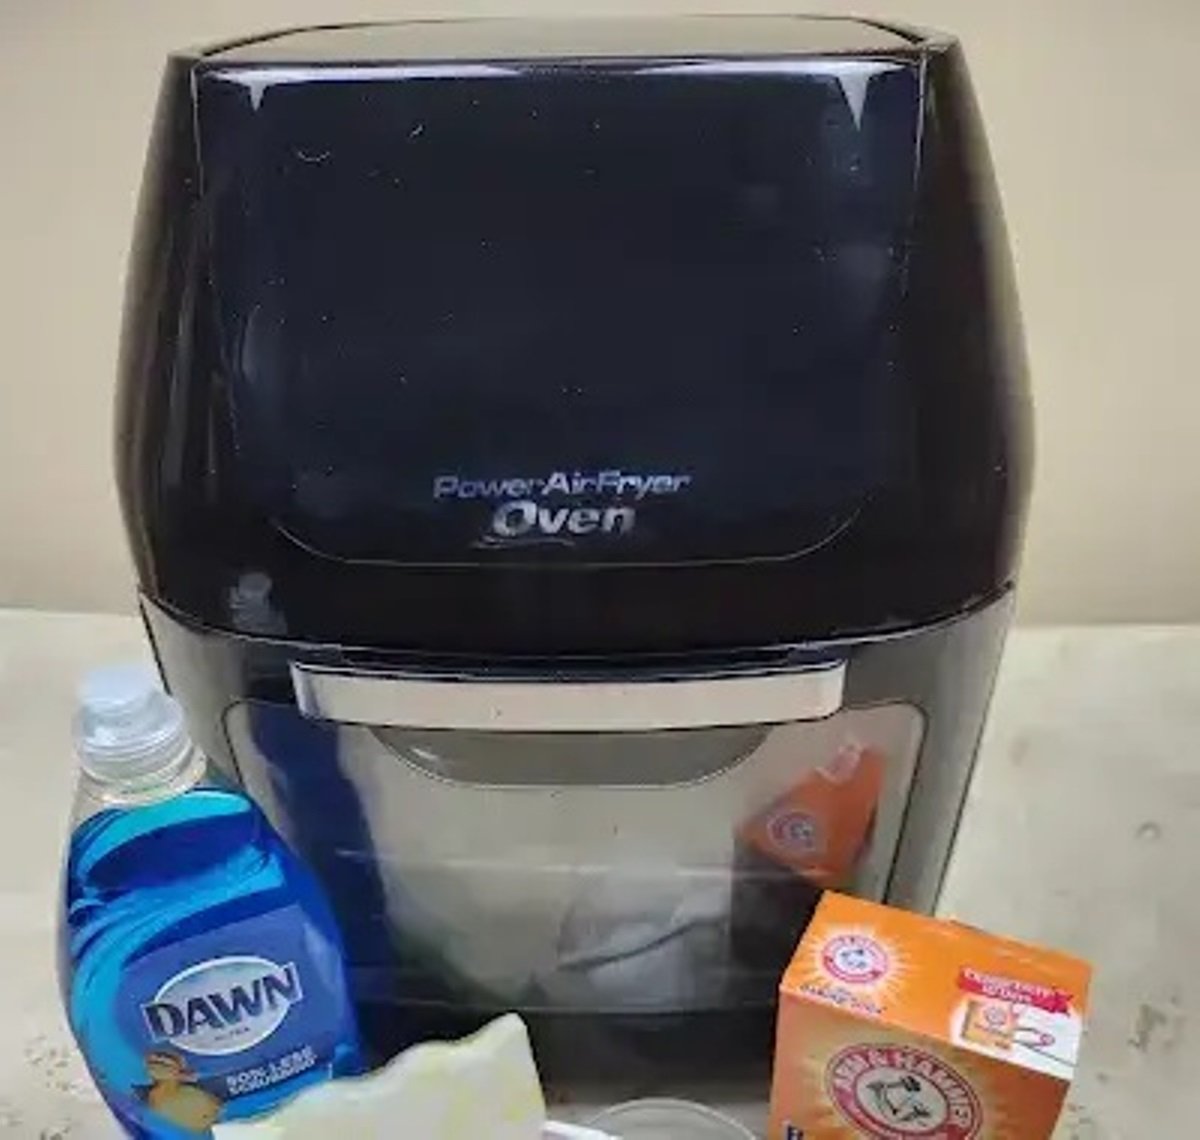 power air fryer oven,  sponge and dish detergent